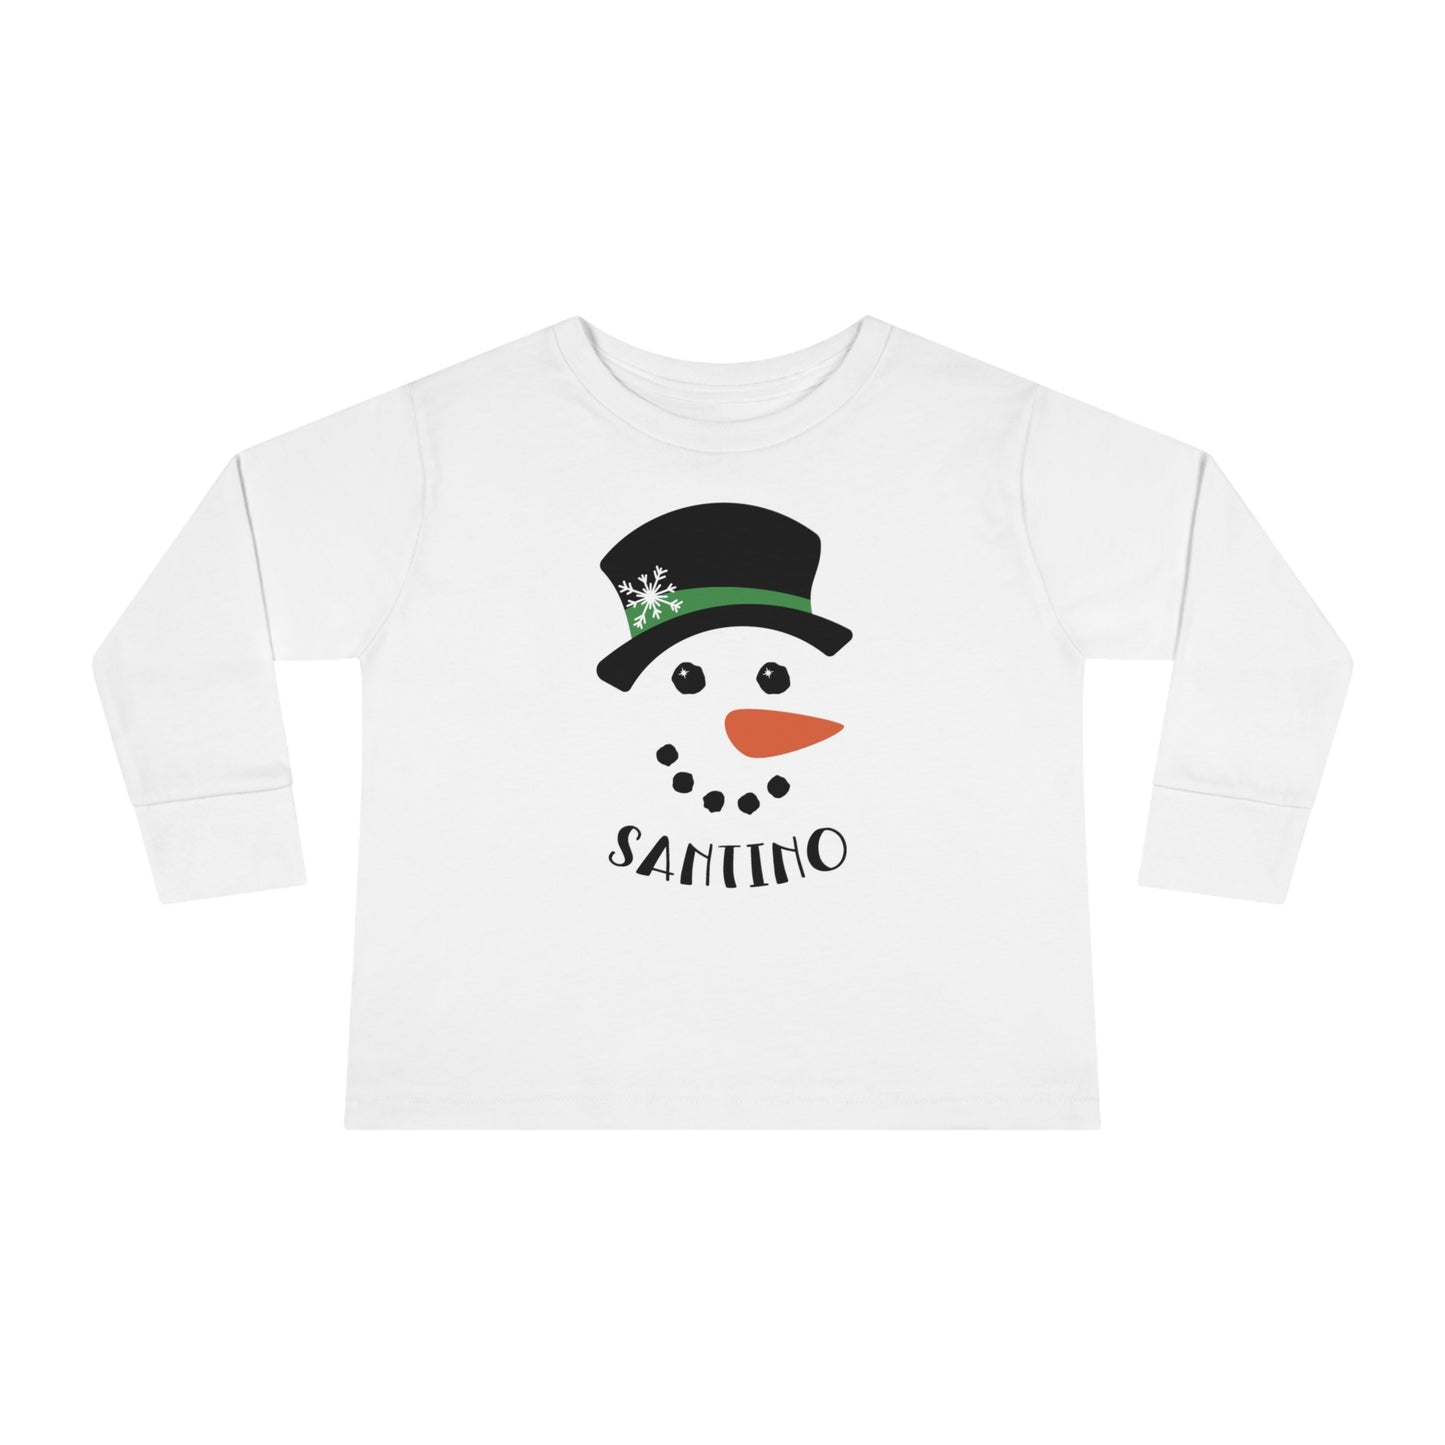 Snowman Personalized Toddler Long Sleeve Tee - Amazing Faith Designs